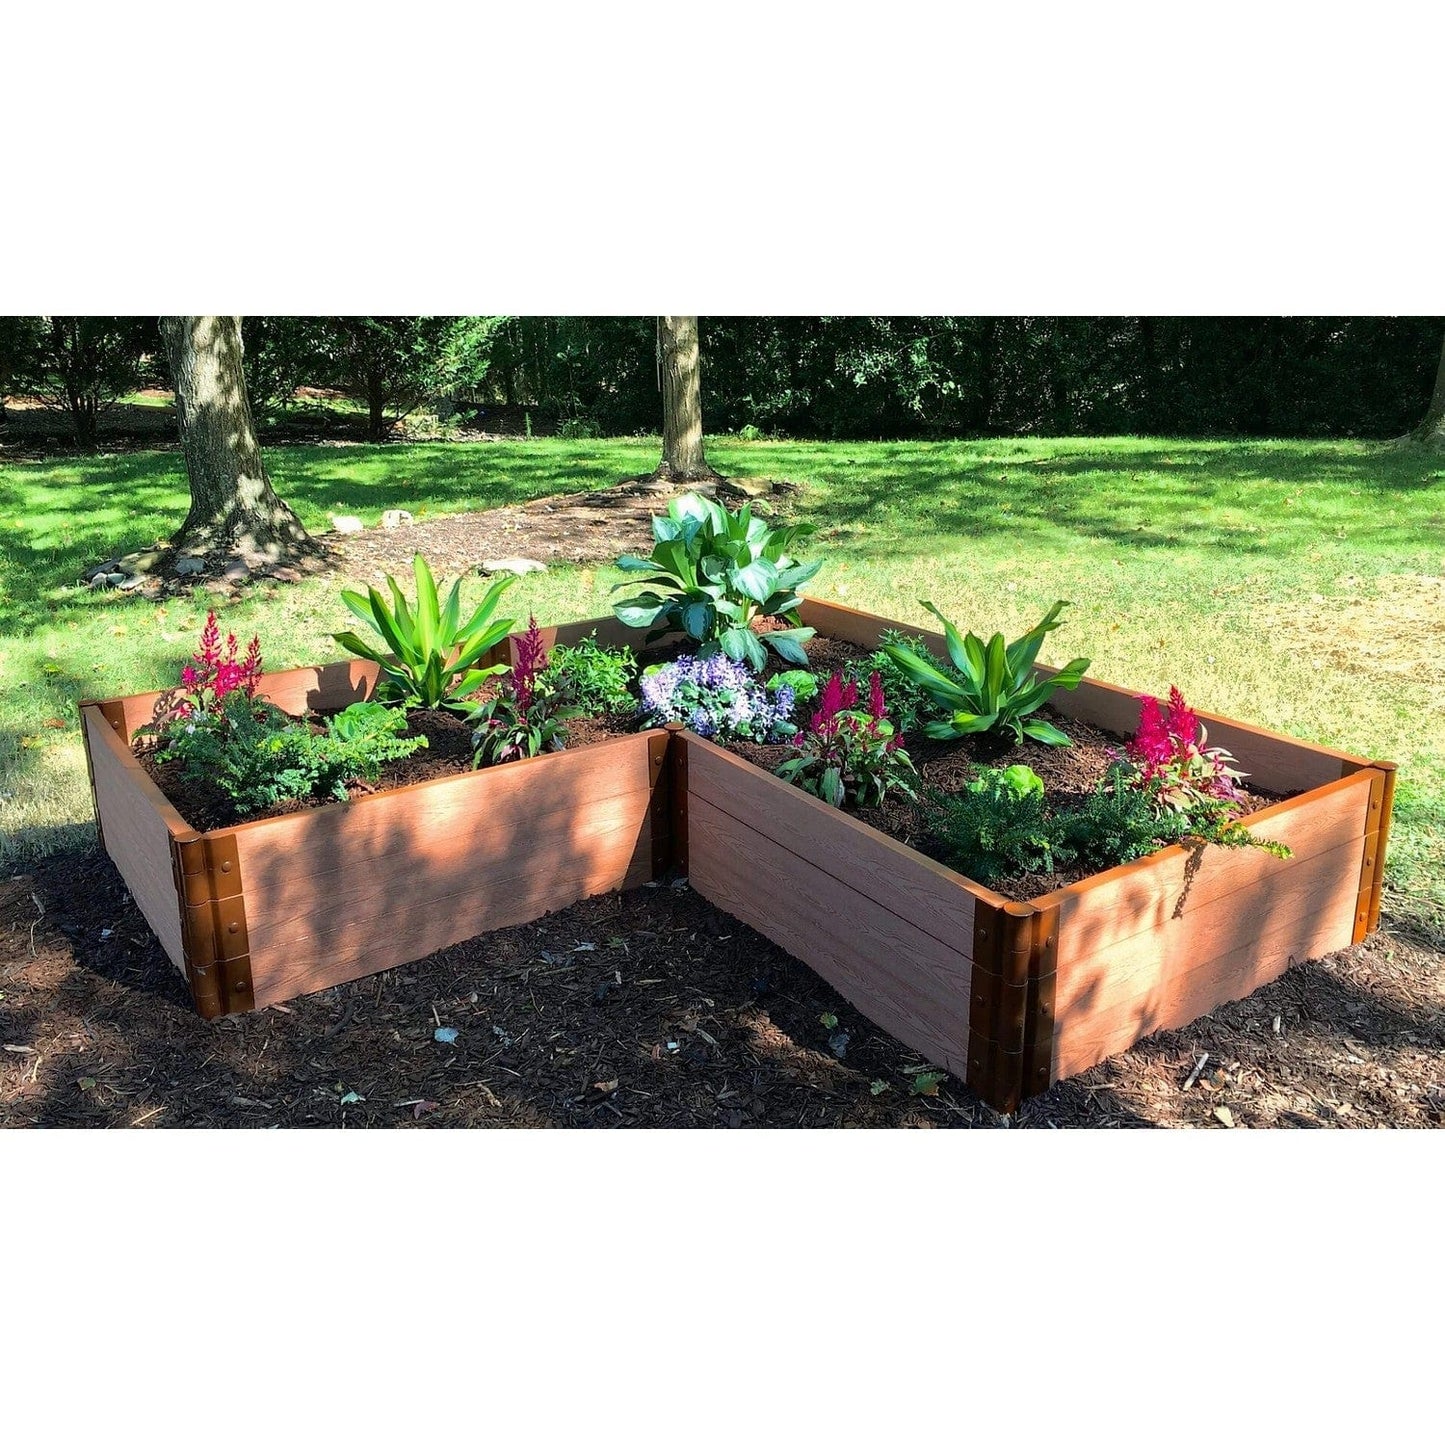 Frame It All Gardening Accessories Frame It All | Tool-Free Arrowhead Straight Corner Raised Garden Bed - 8' X 8' X 22" - Weathered Wood - 1" Profile 800004002